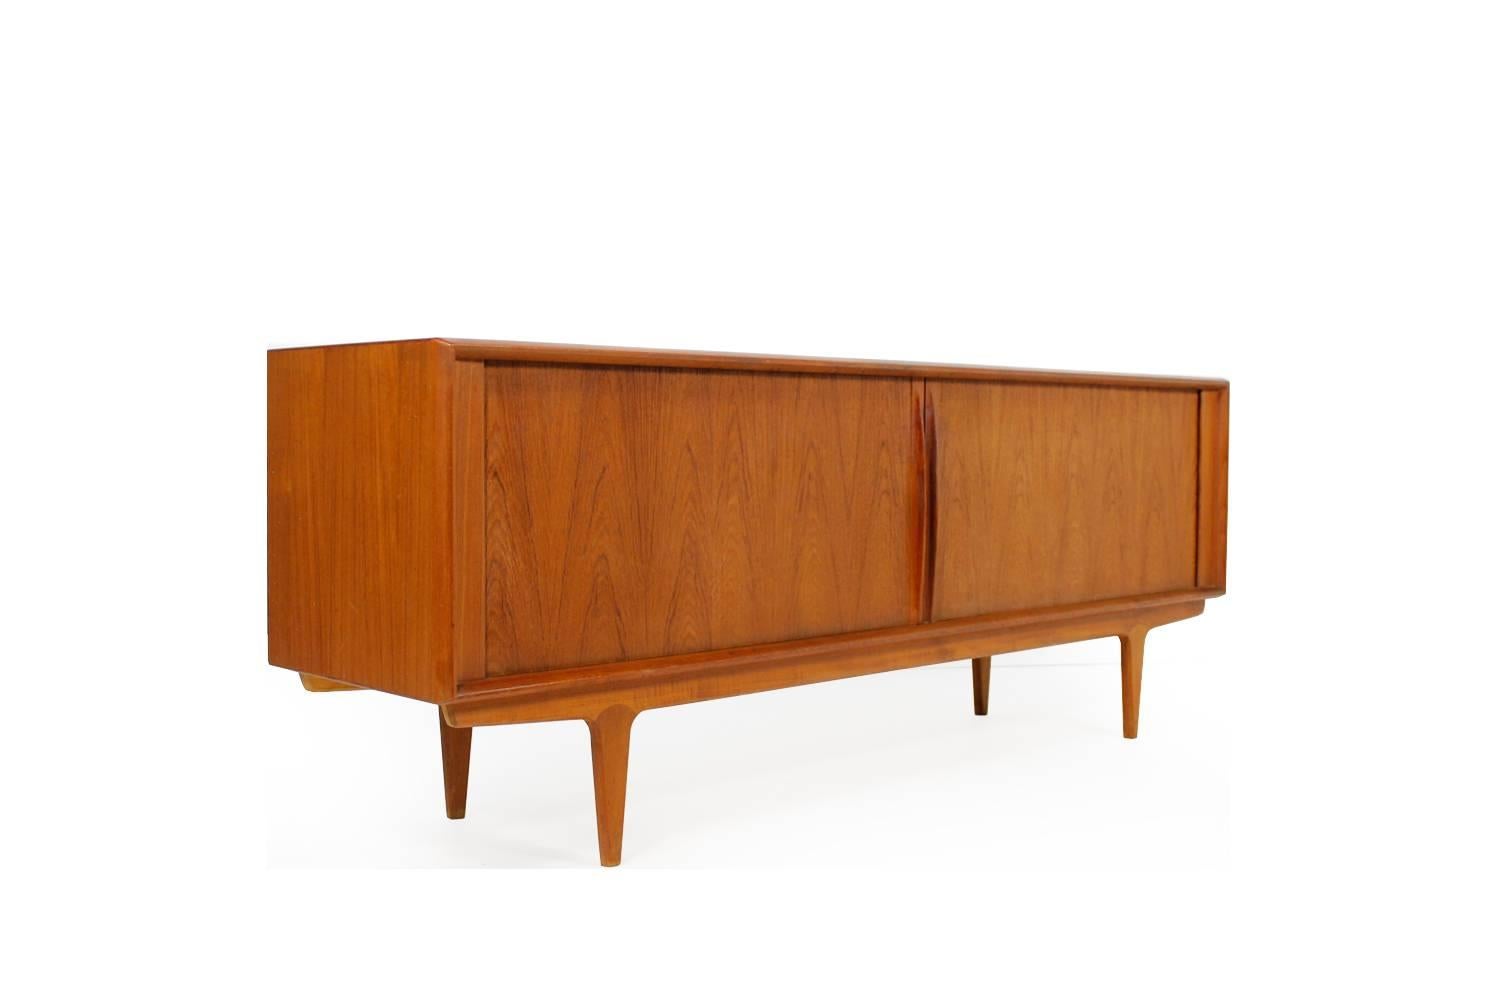 Beautiful 1960s Danish modern design by Bernhard Pedersen & Son (BPS) sideboard made of Teak Wood.
Beautiful condition, also very clean from the inside.